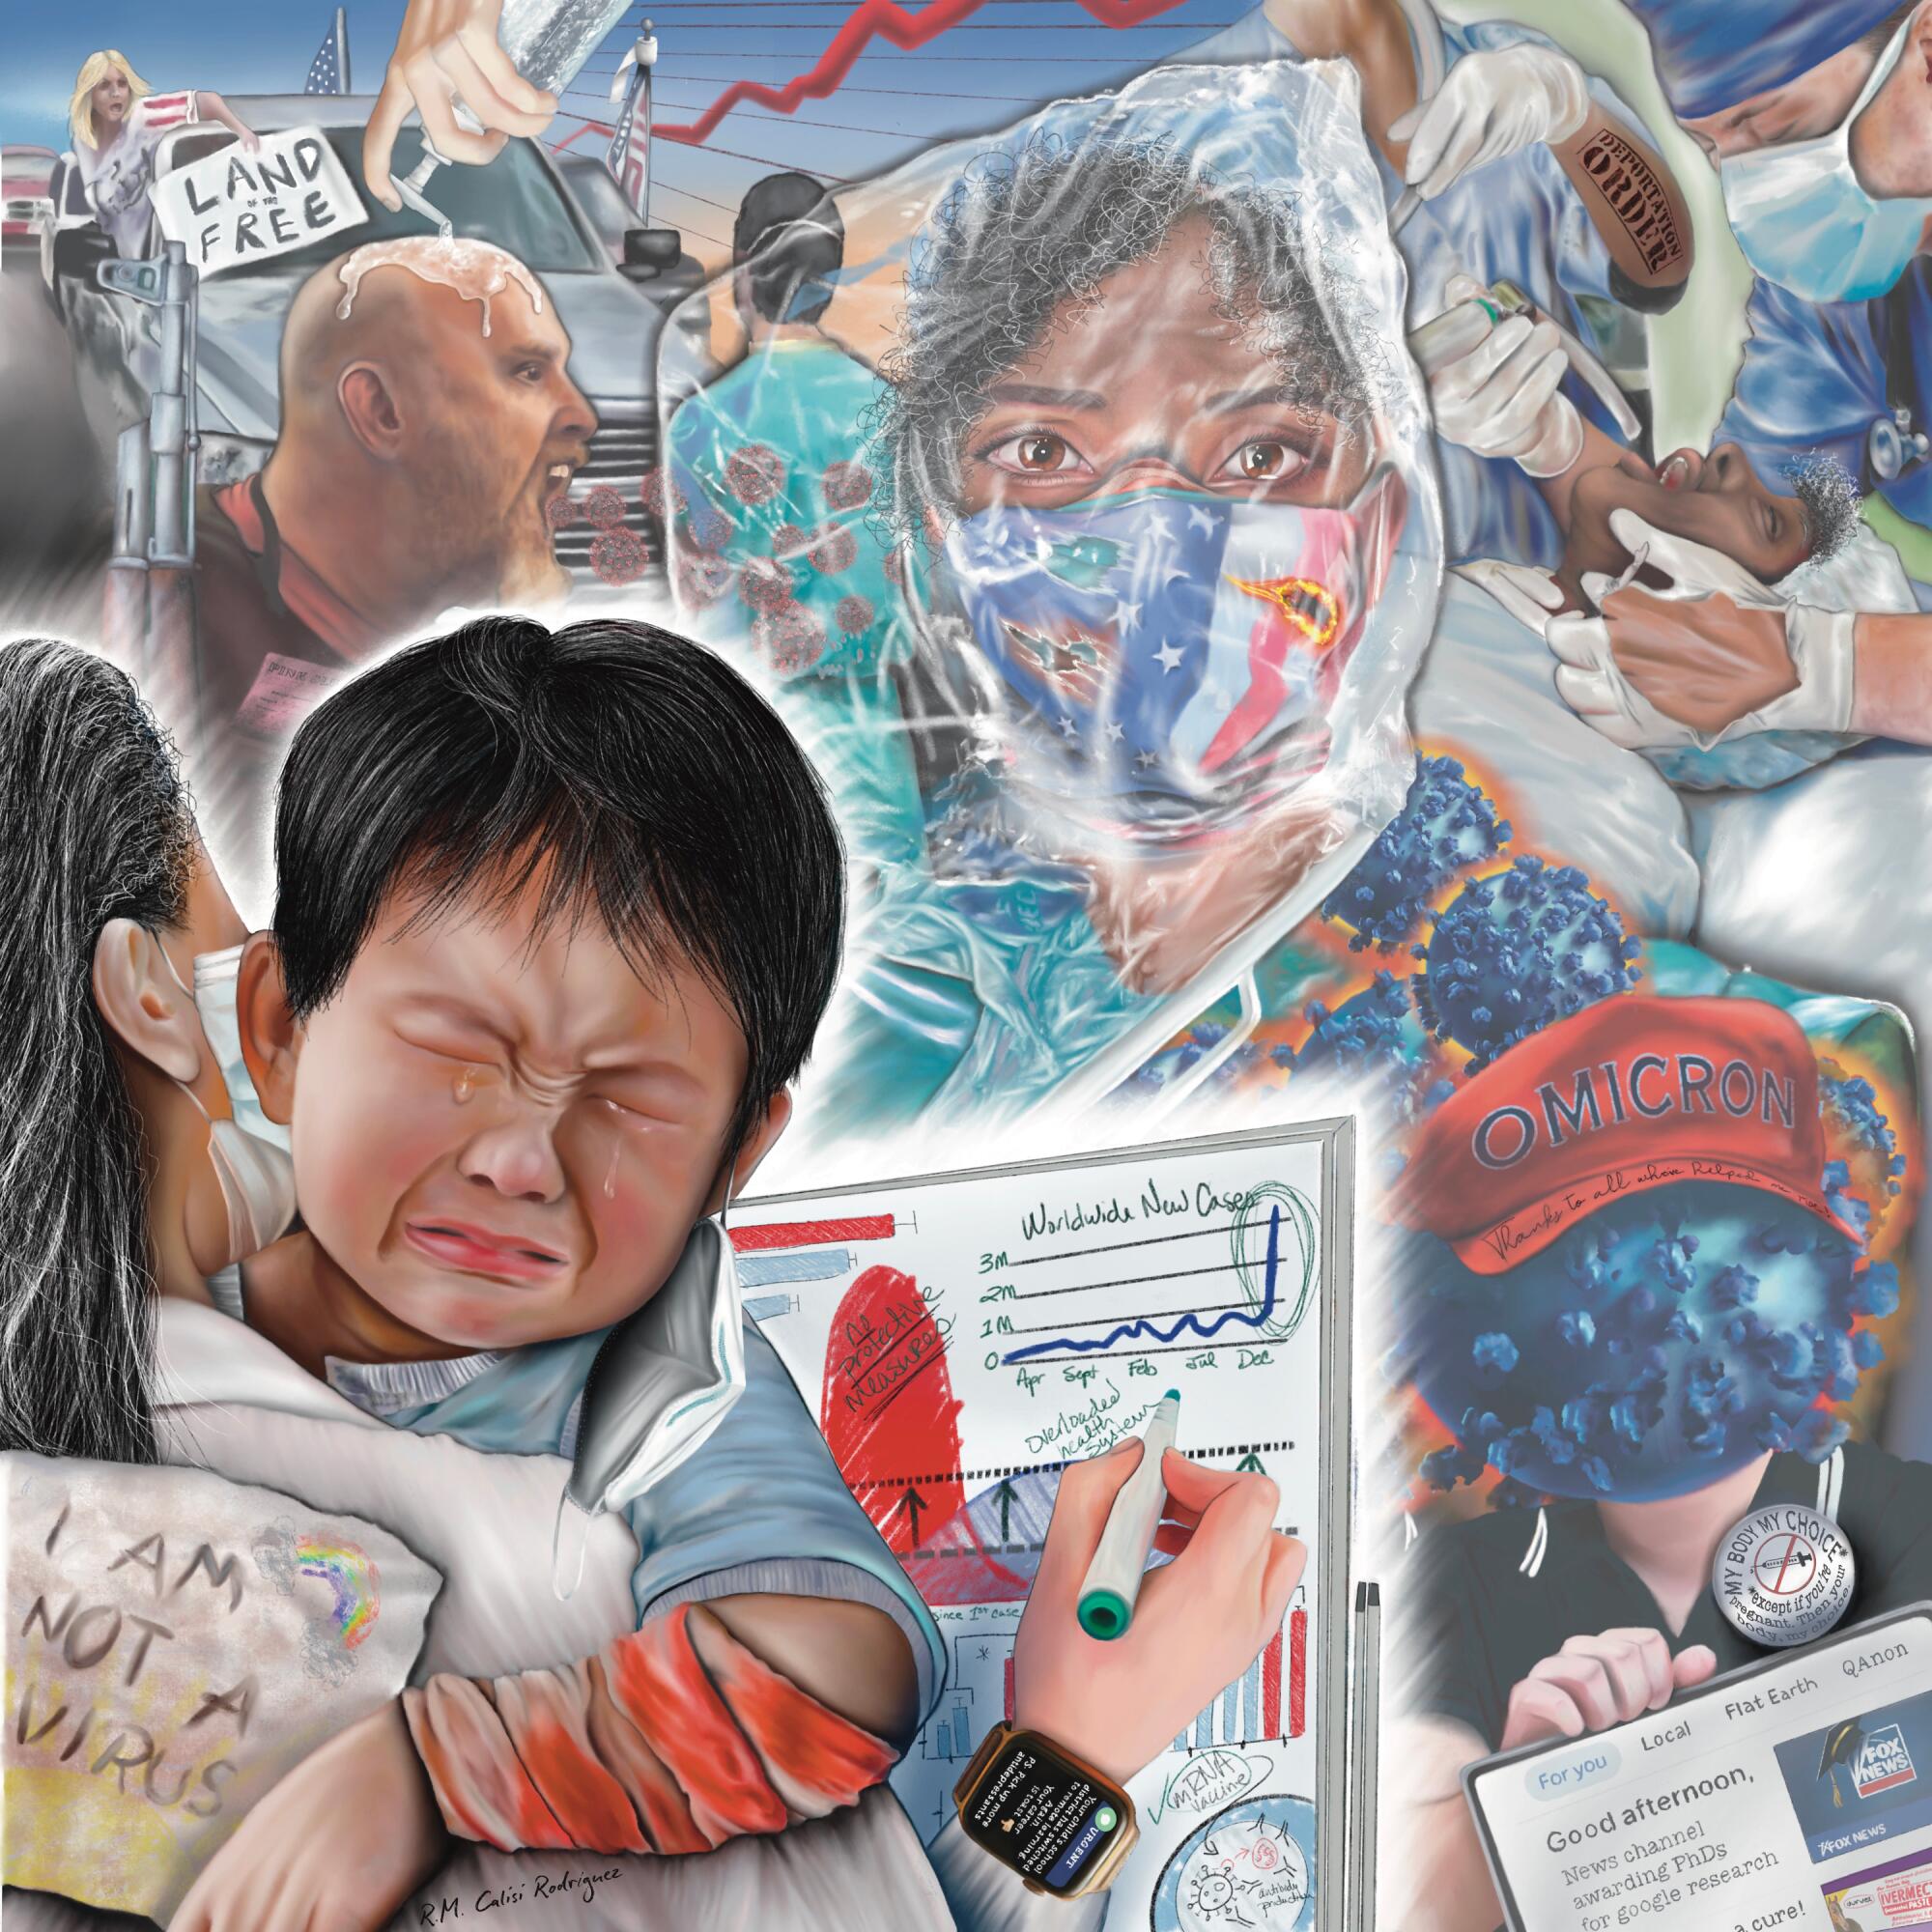 Illustration depicting scenes of COVID-19 workers, patients, and protesters, with parent and crying child in foreground.